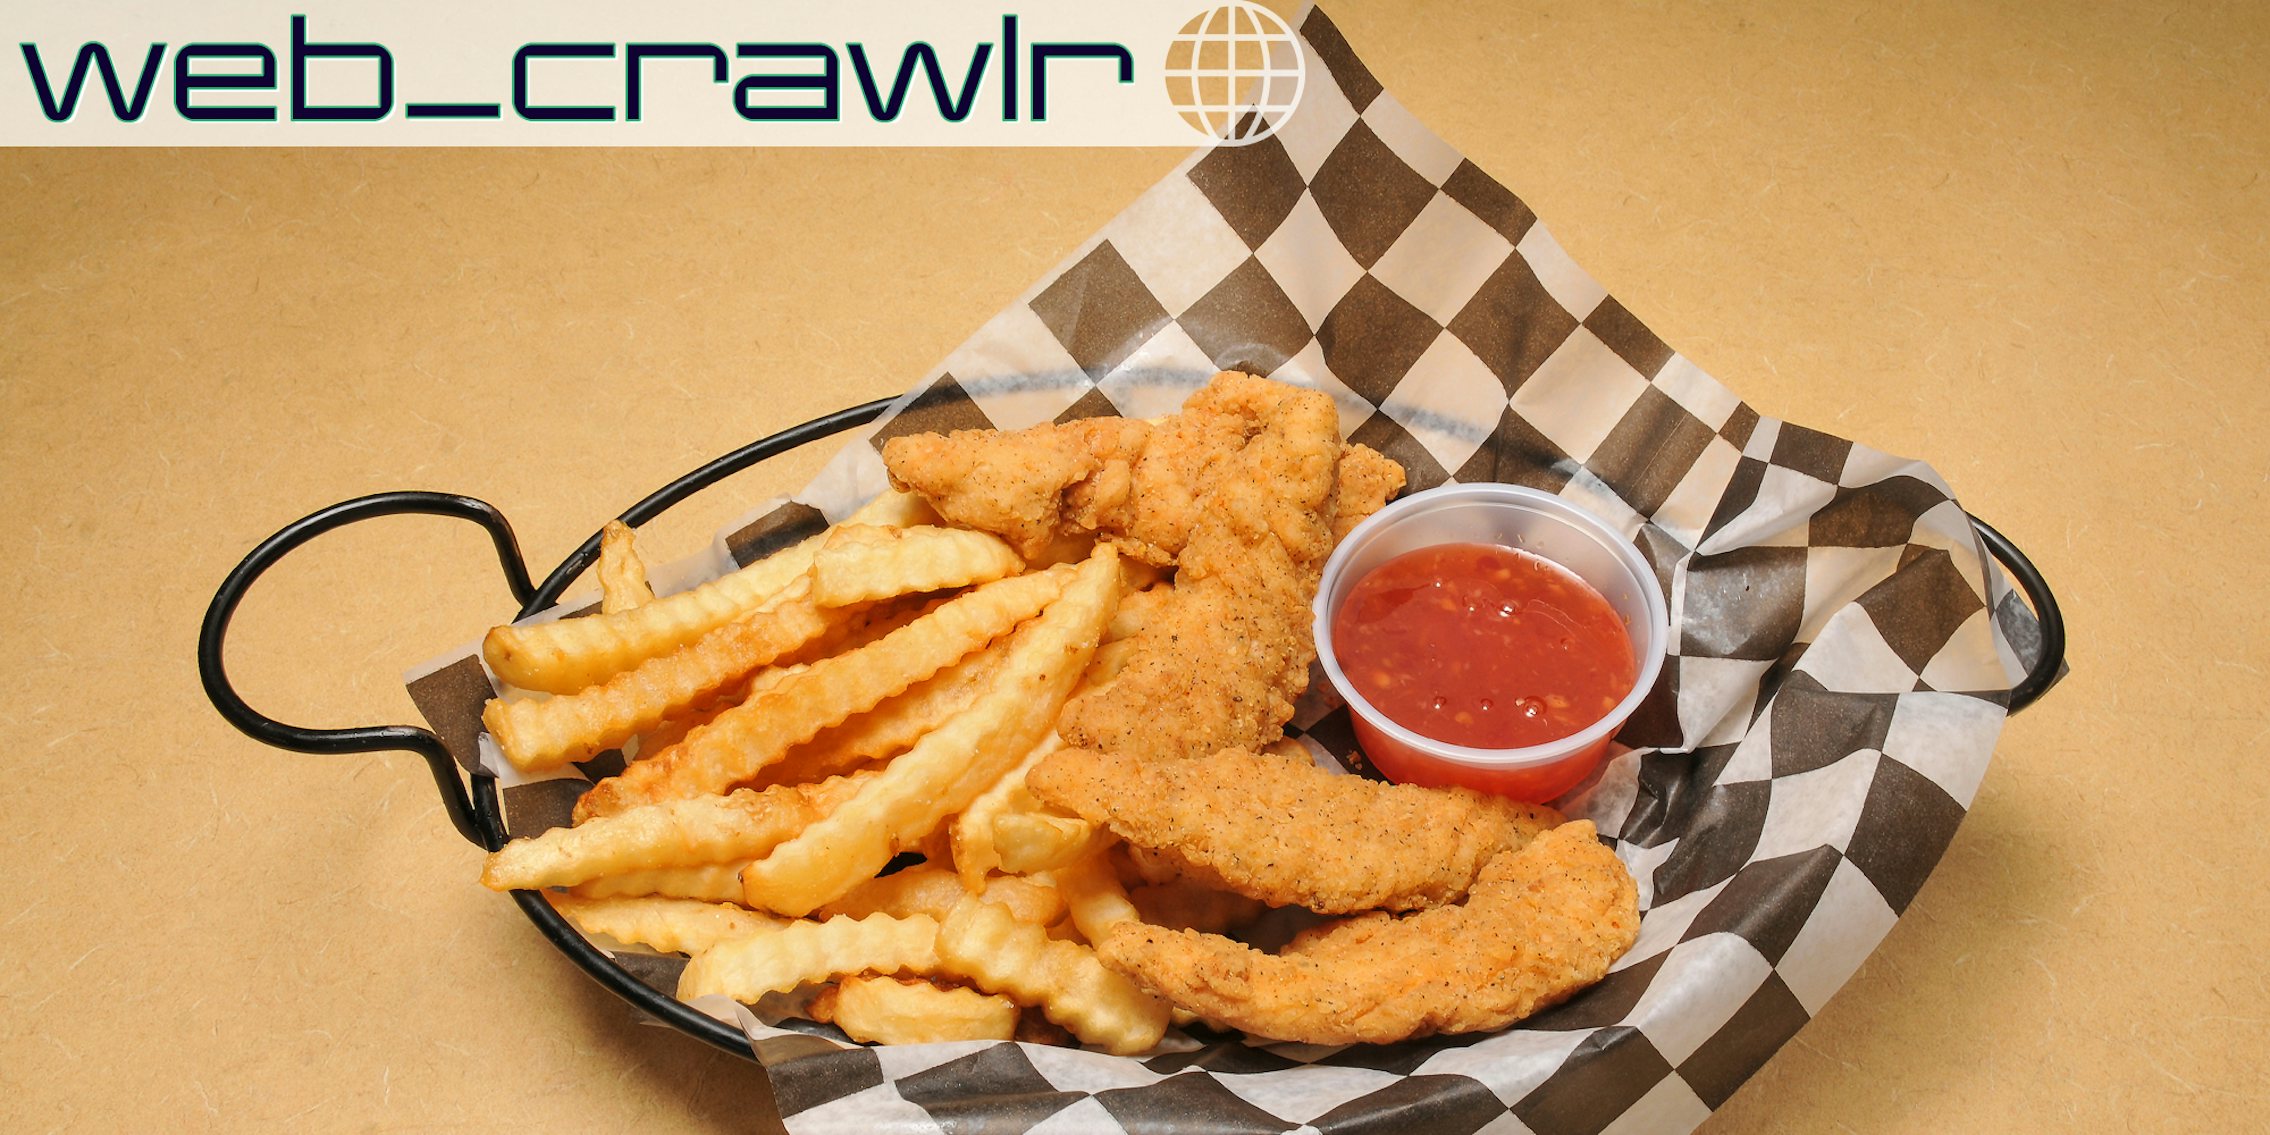 Chicken fingers and fries. The Daily Dot newsletter web_crawlr logo is in the top left corner.